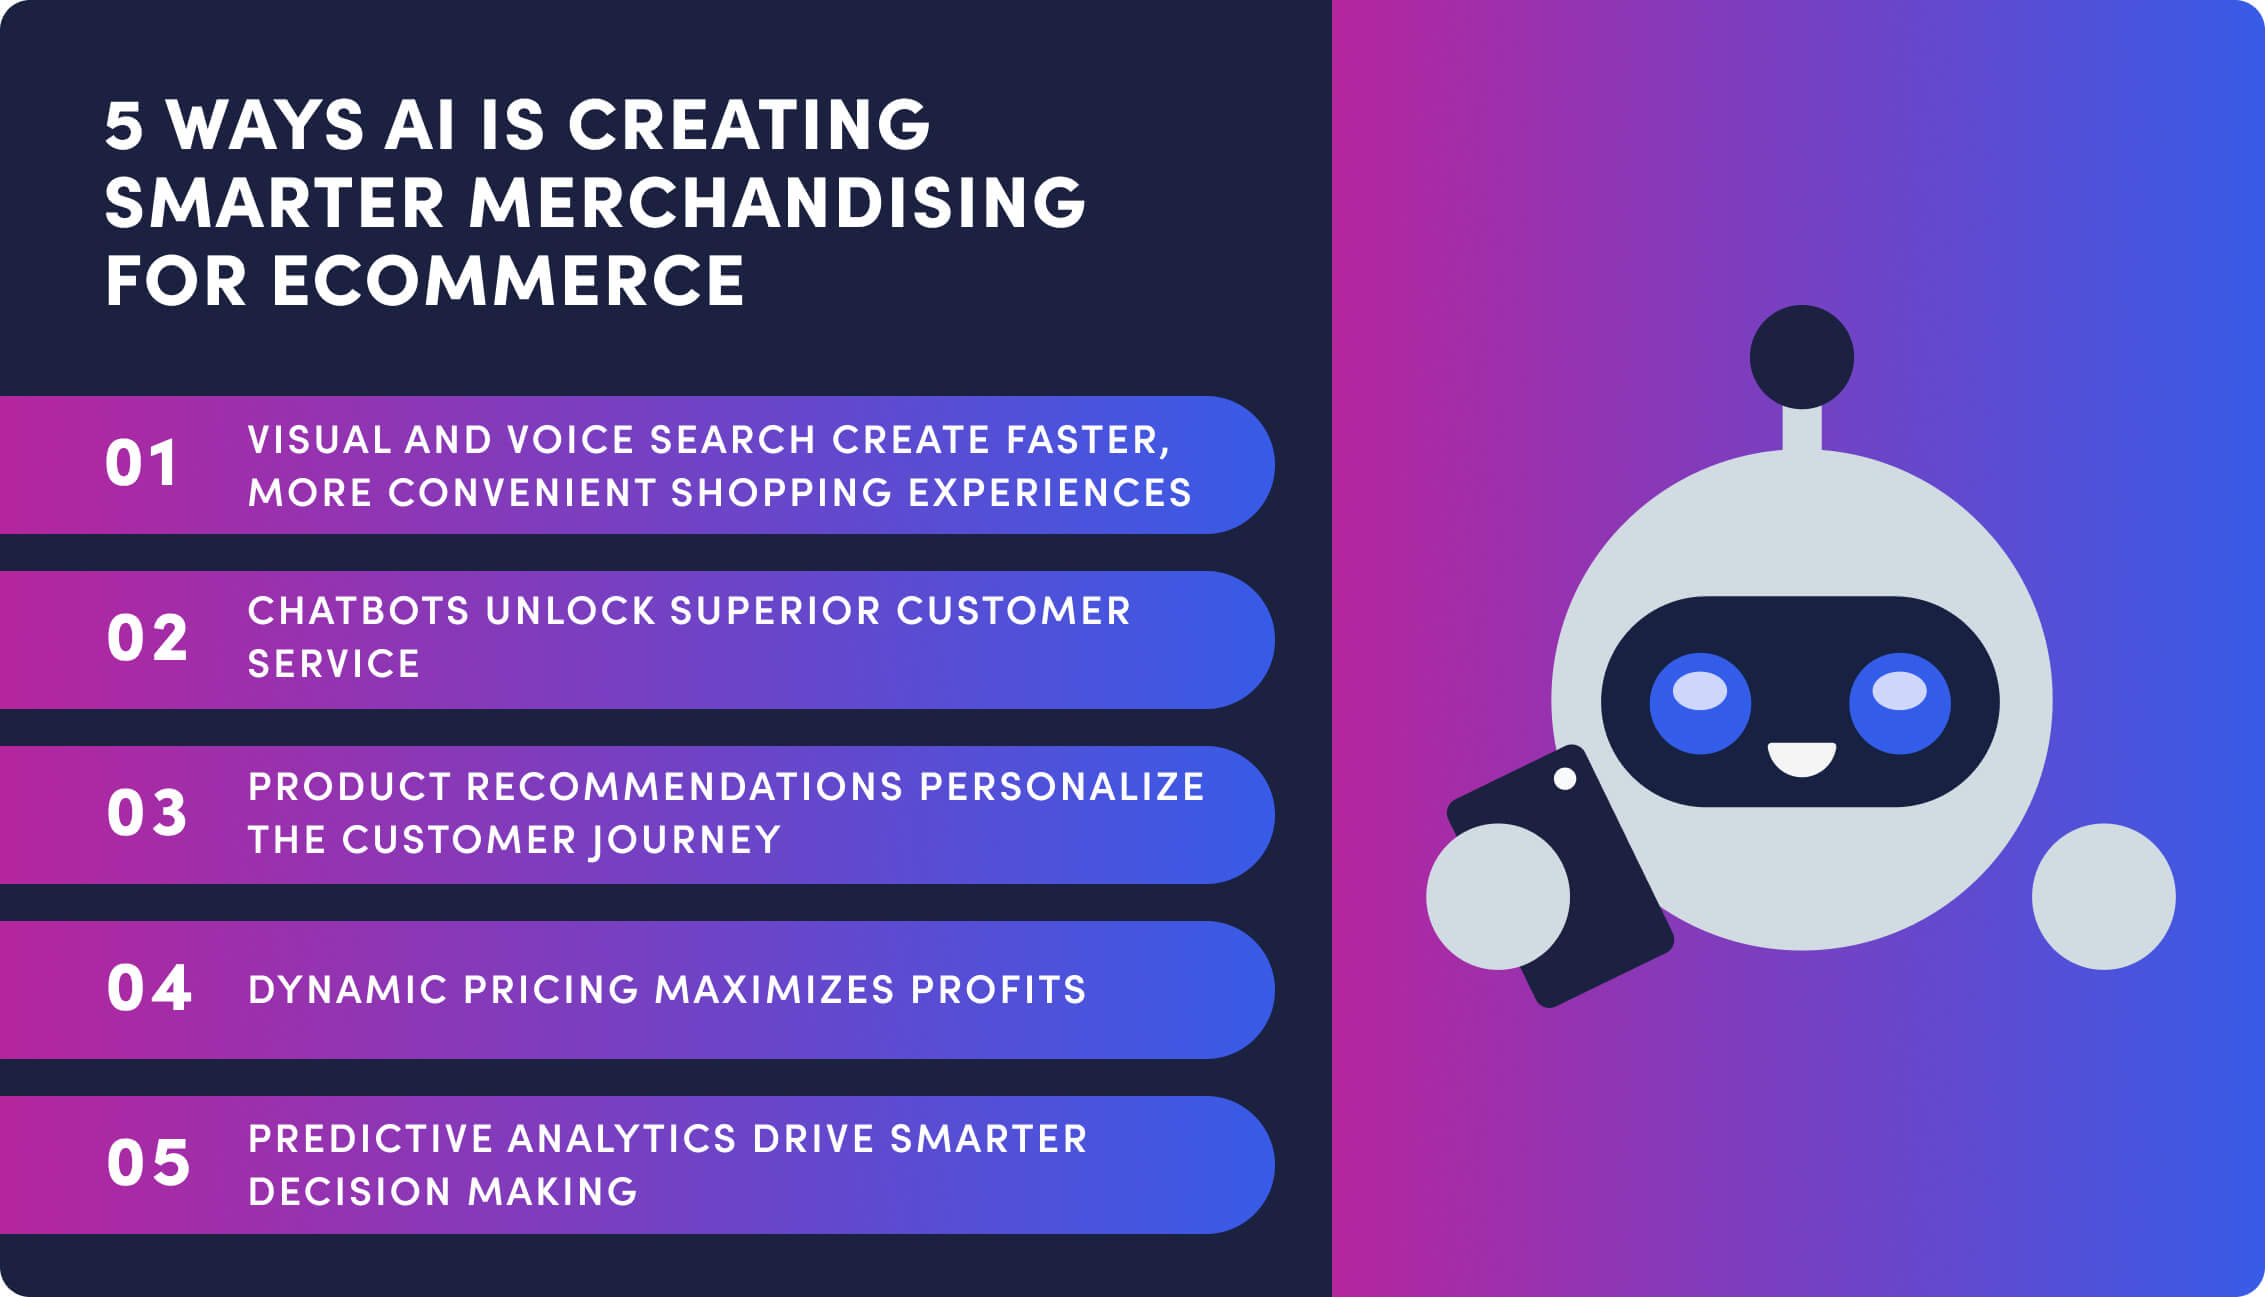 5 Ways AI Is Creating Smarter Merchandising for Ecommerce_In Blog Image_2